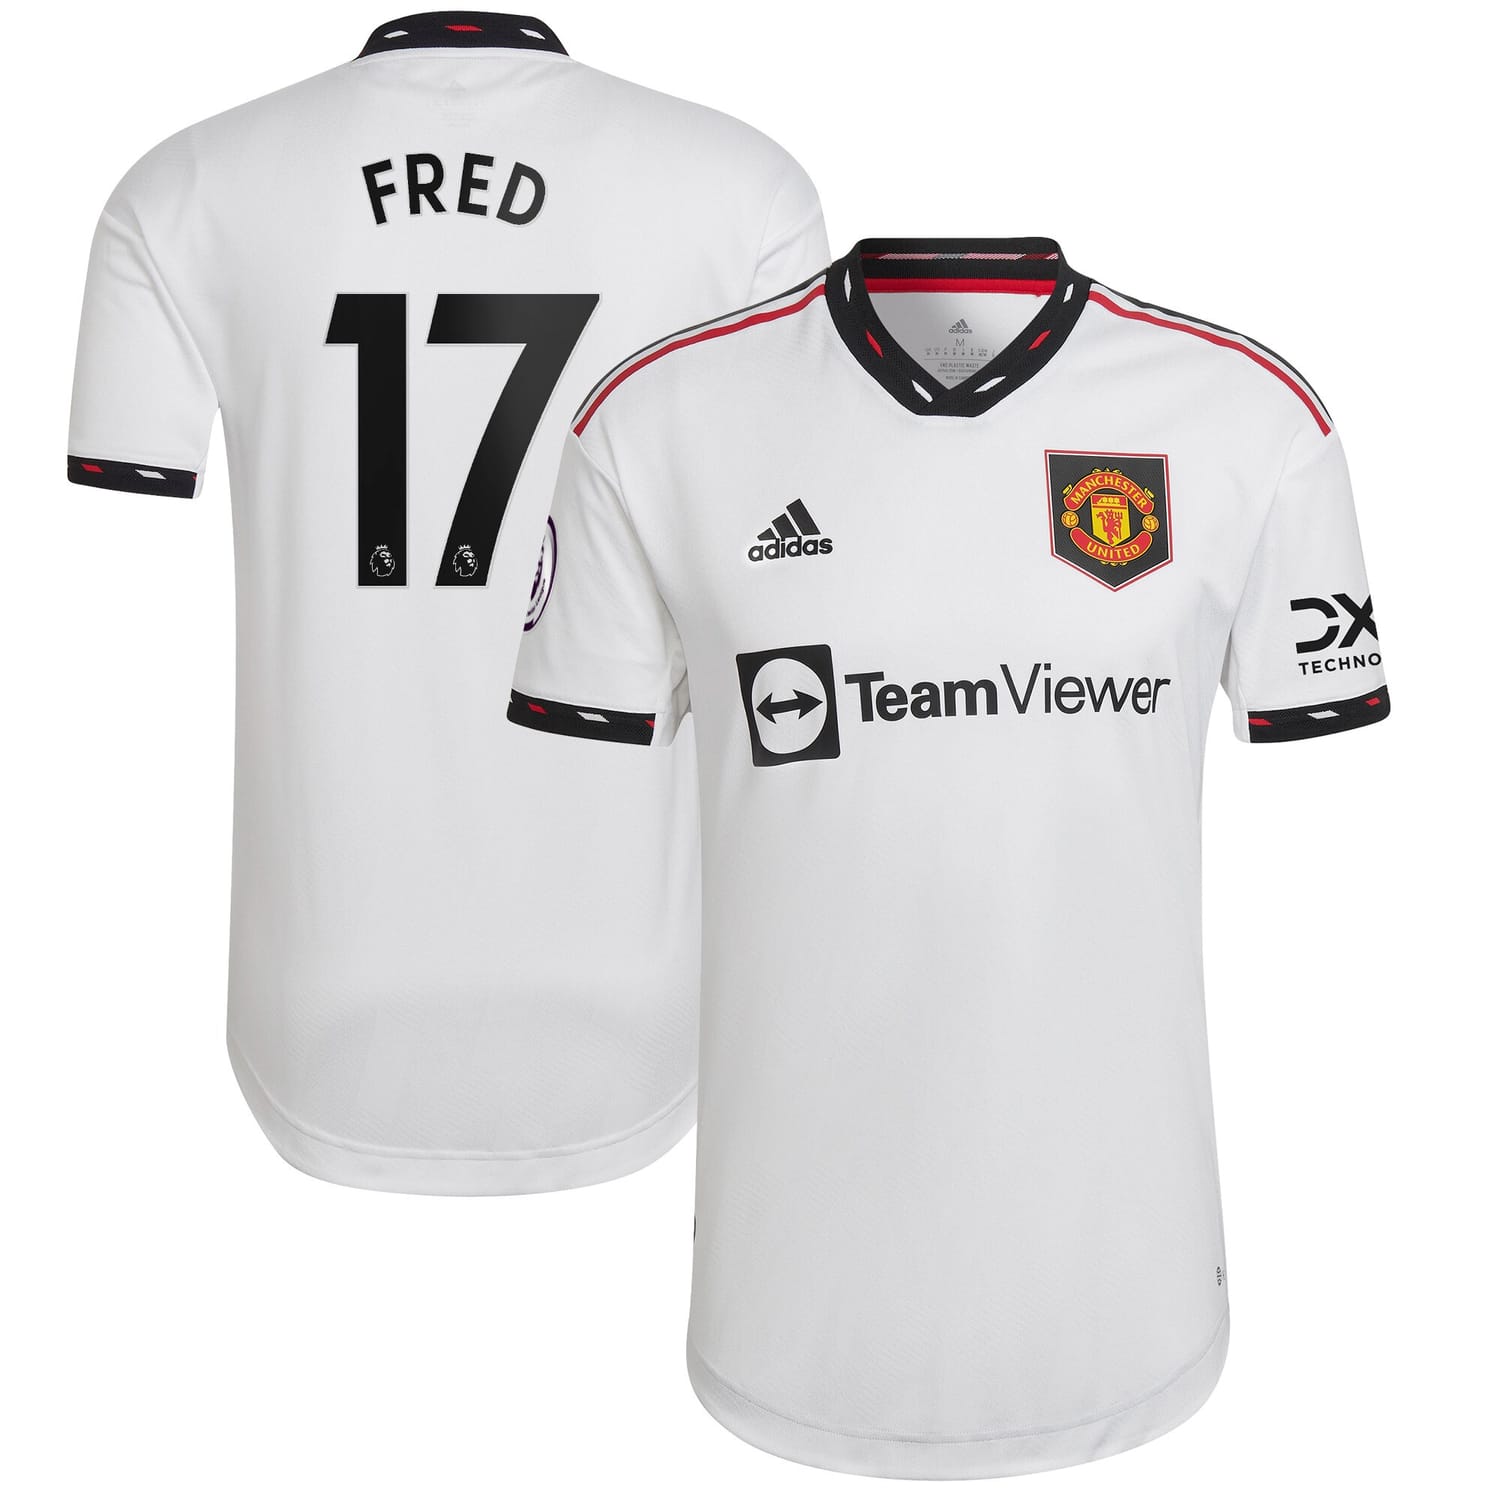 Premier League Manchester United Away Authentic Jersey Shirt White 2022-23 player Fred printing for Men